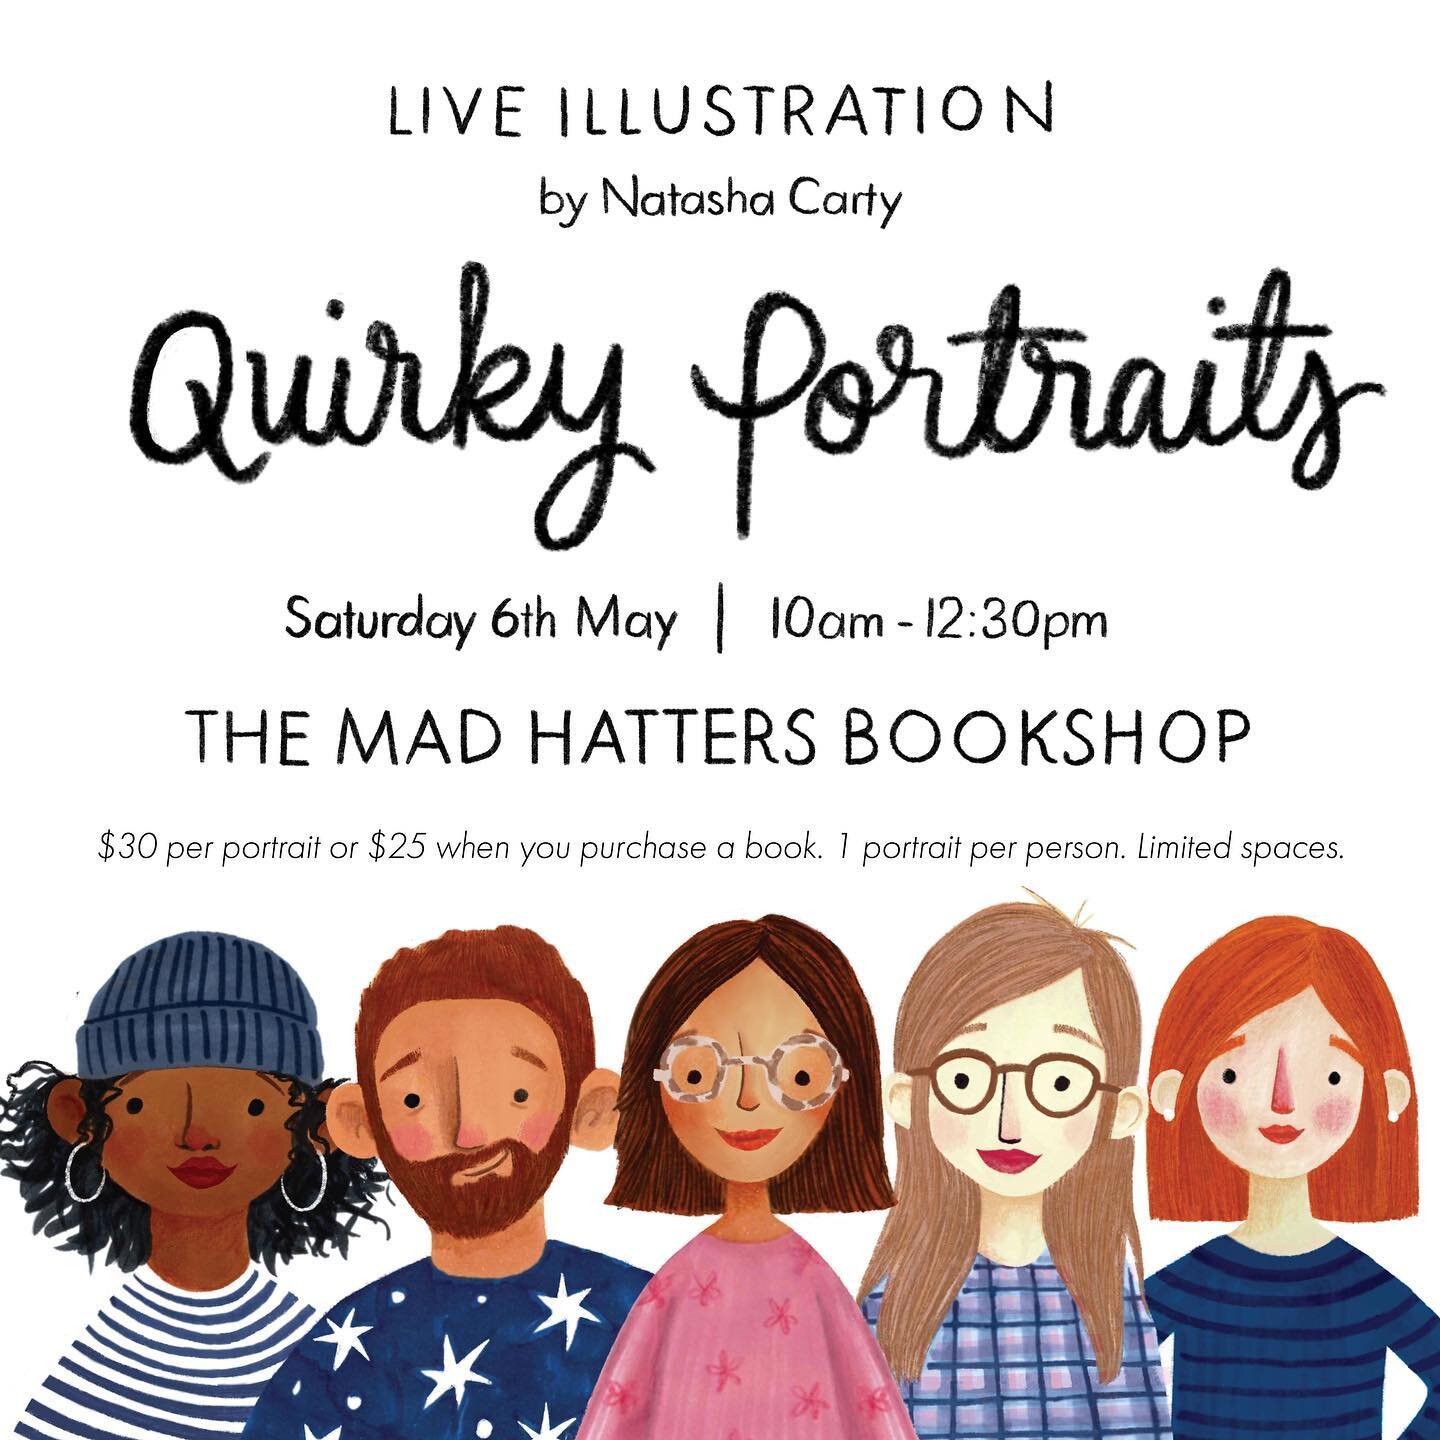 Here is some exciting news! ✨ I have my FIRST EVER LIVE ILLUSTRATING GIG in Brisbane this weekend at the very beautiful @madhattersbookshop in Manly 📚✨ Drop in between 10:00-12:30 to get a quirky portrait done by me. And helpful tip: with Mother&rsq